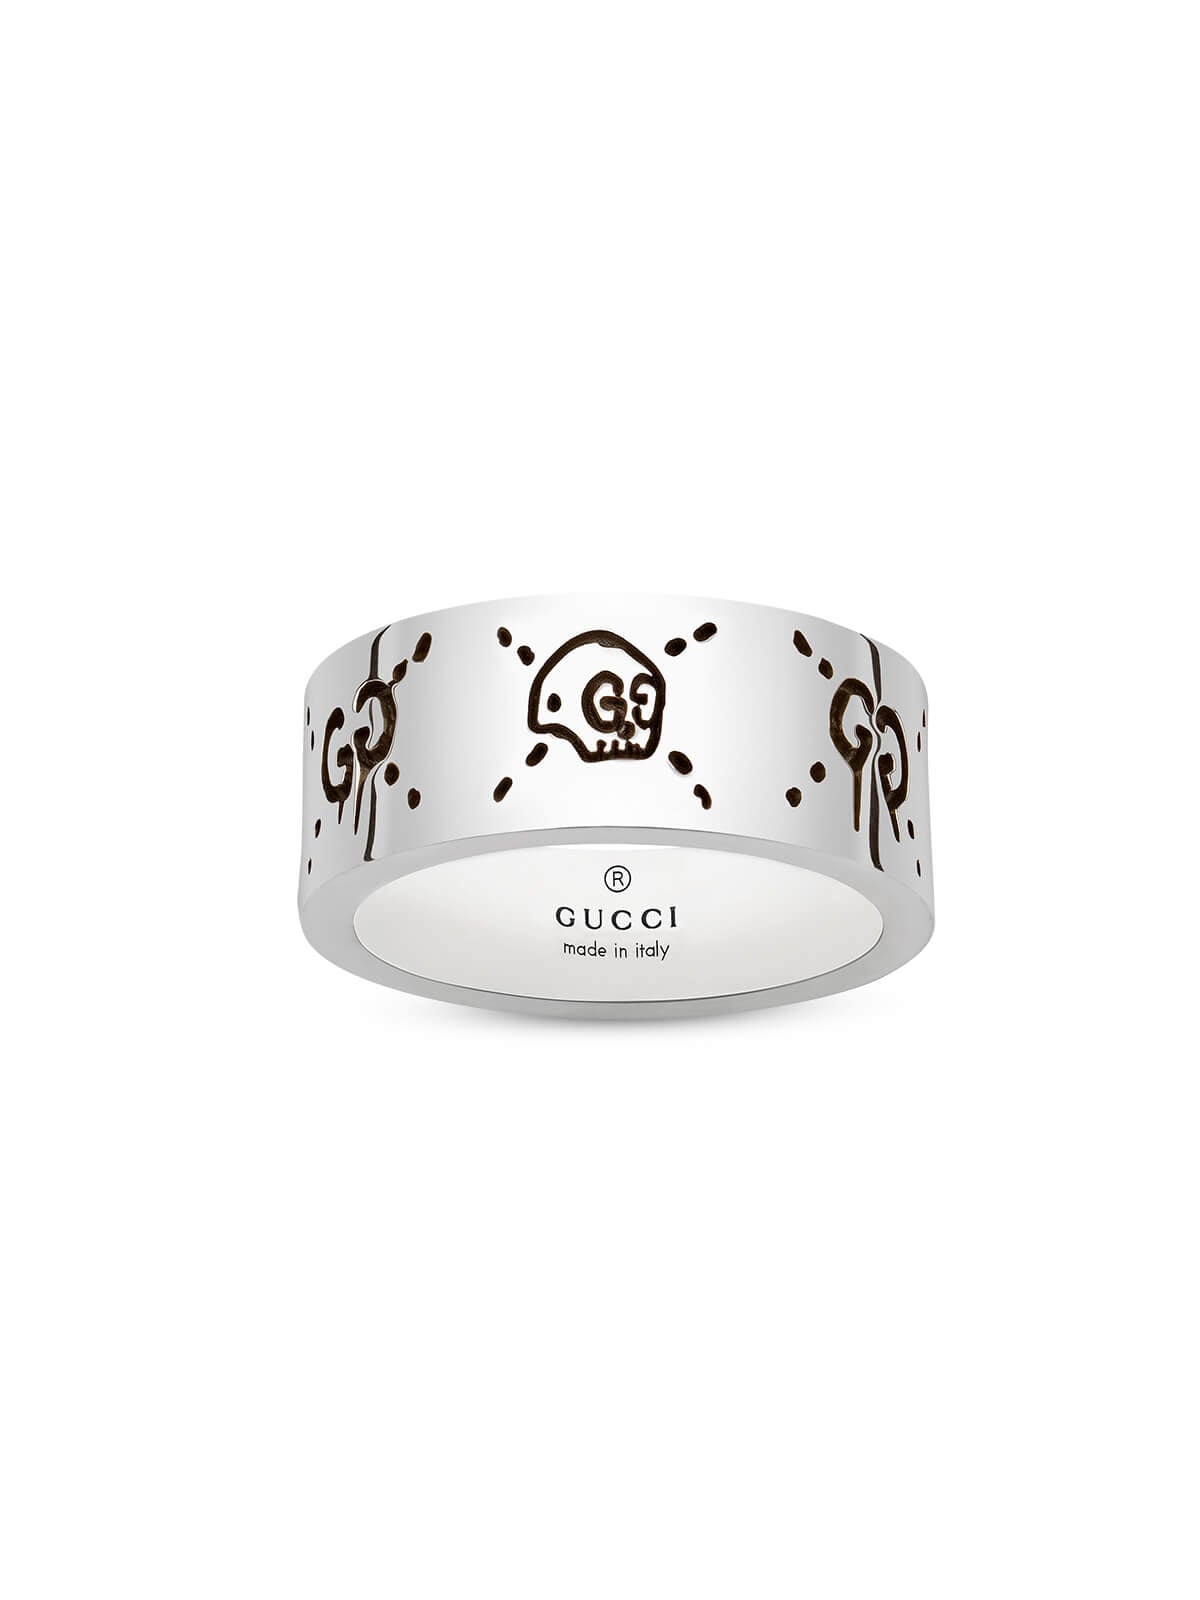 Gucci Ghost Ring 9mm in Silver - Size 16